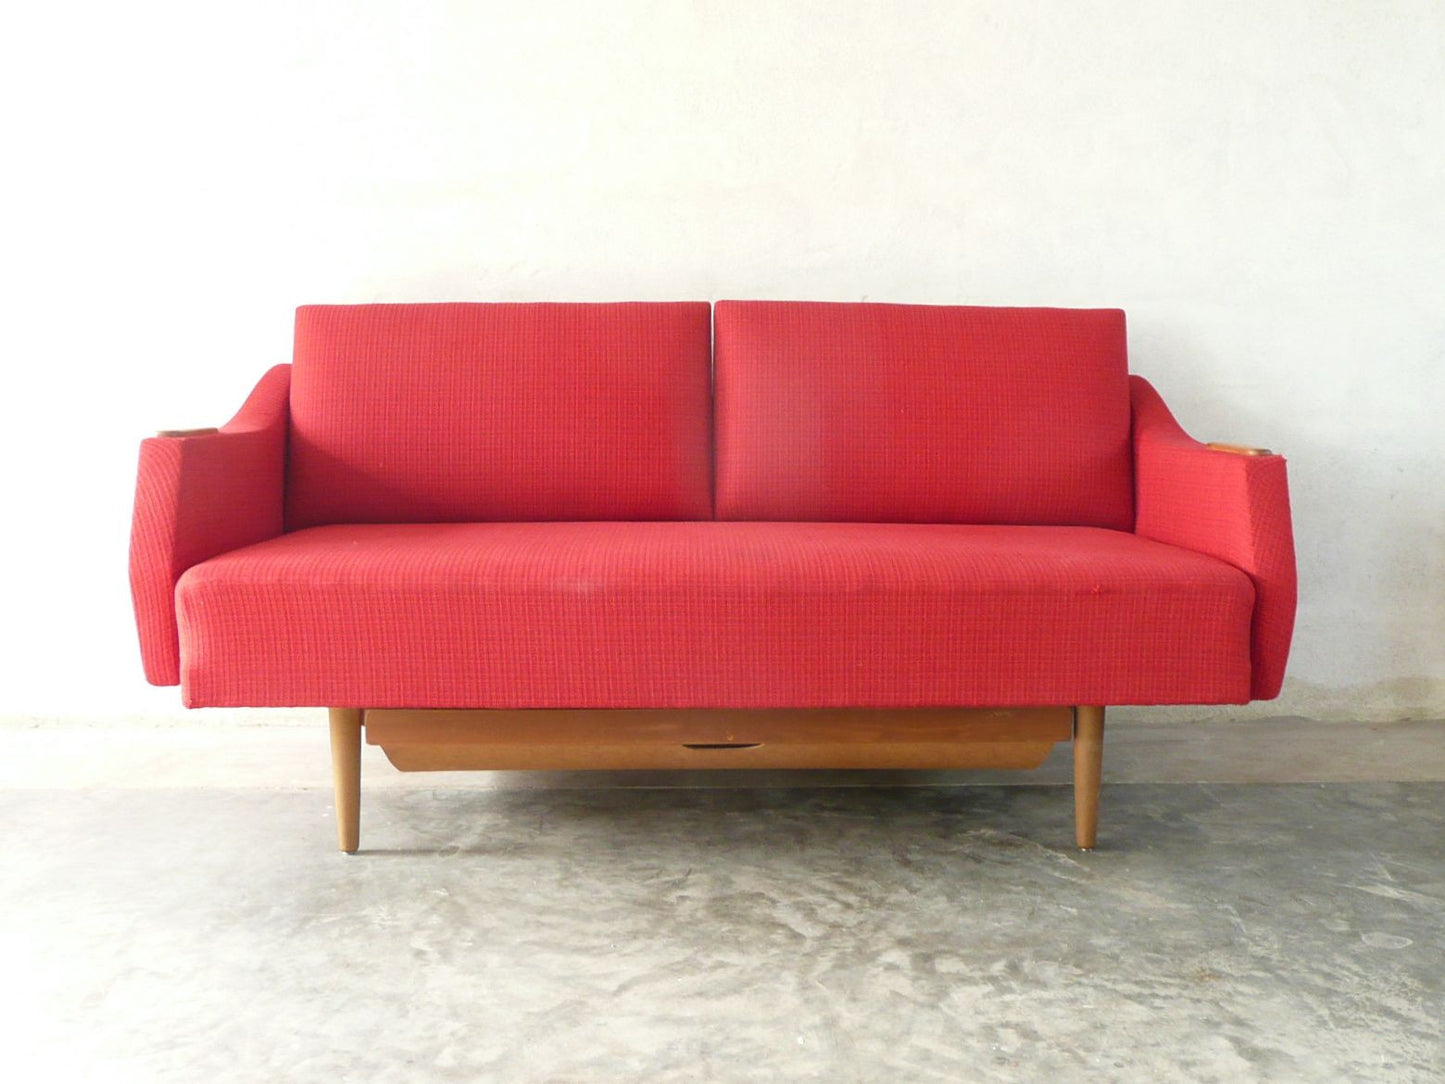 New price: Sofabed